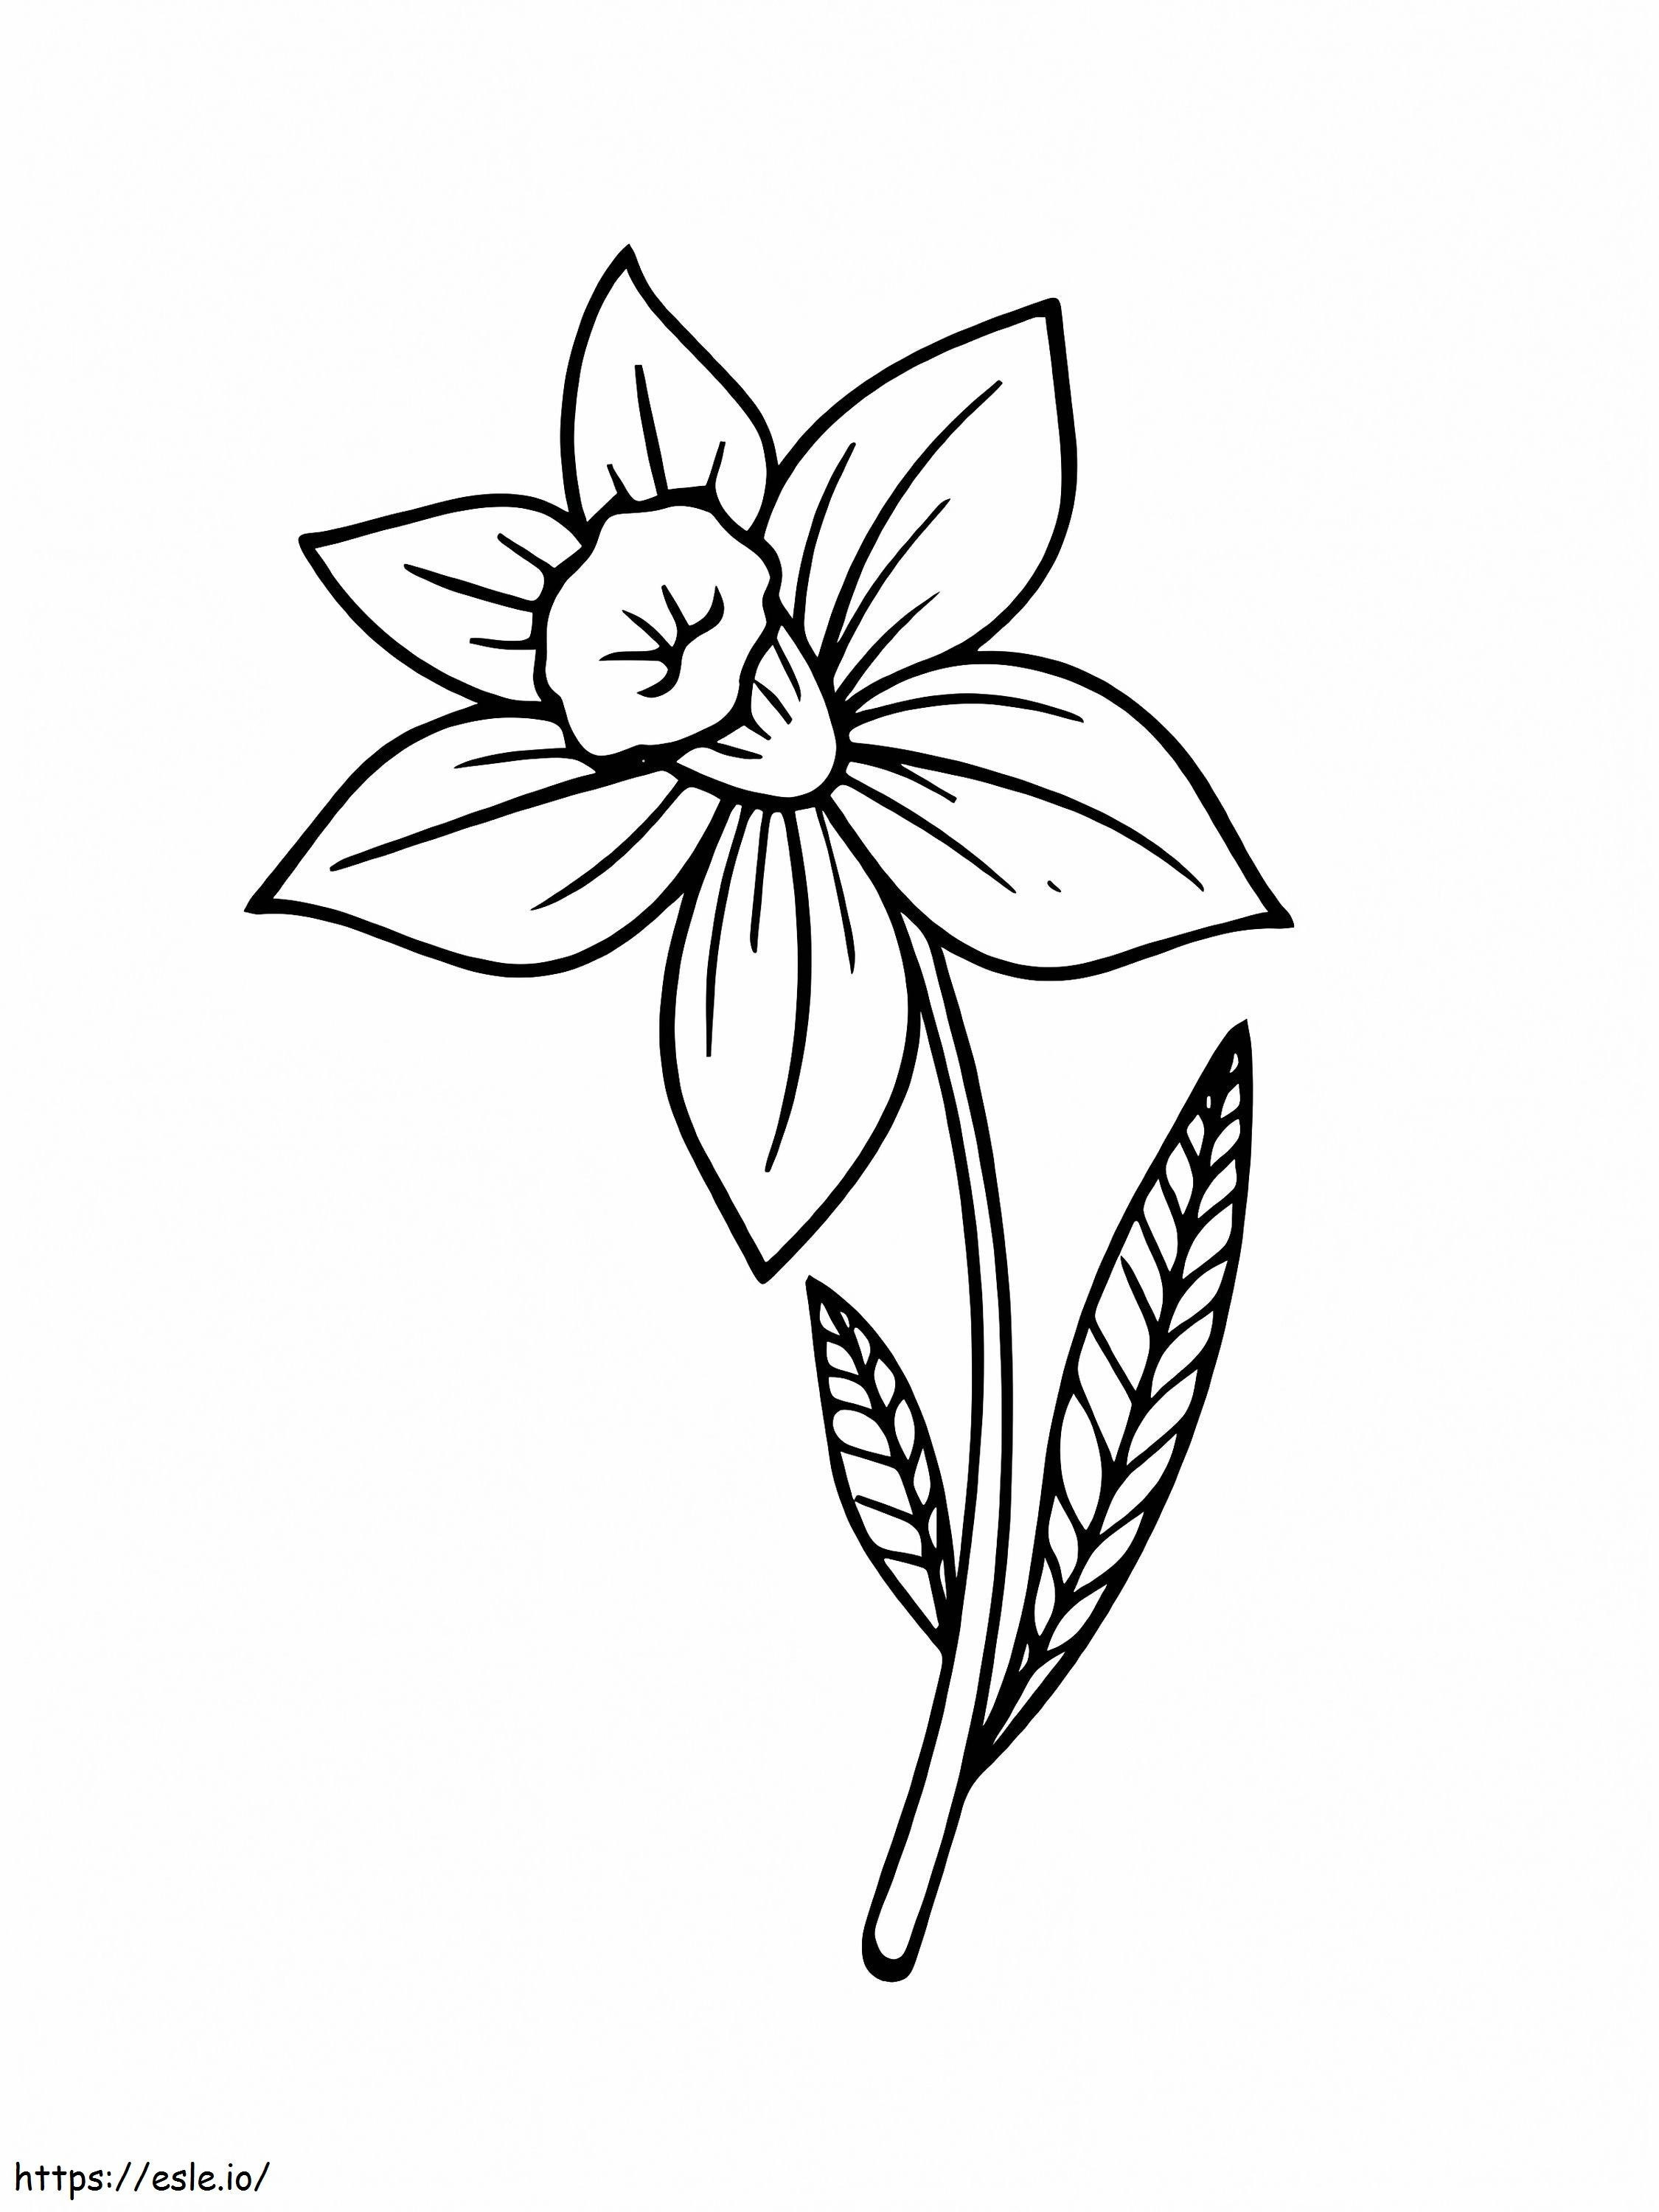 Daffodil Flower coloring page